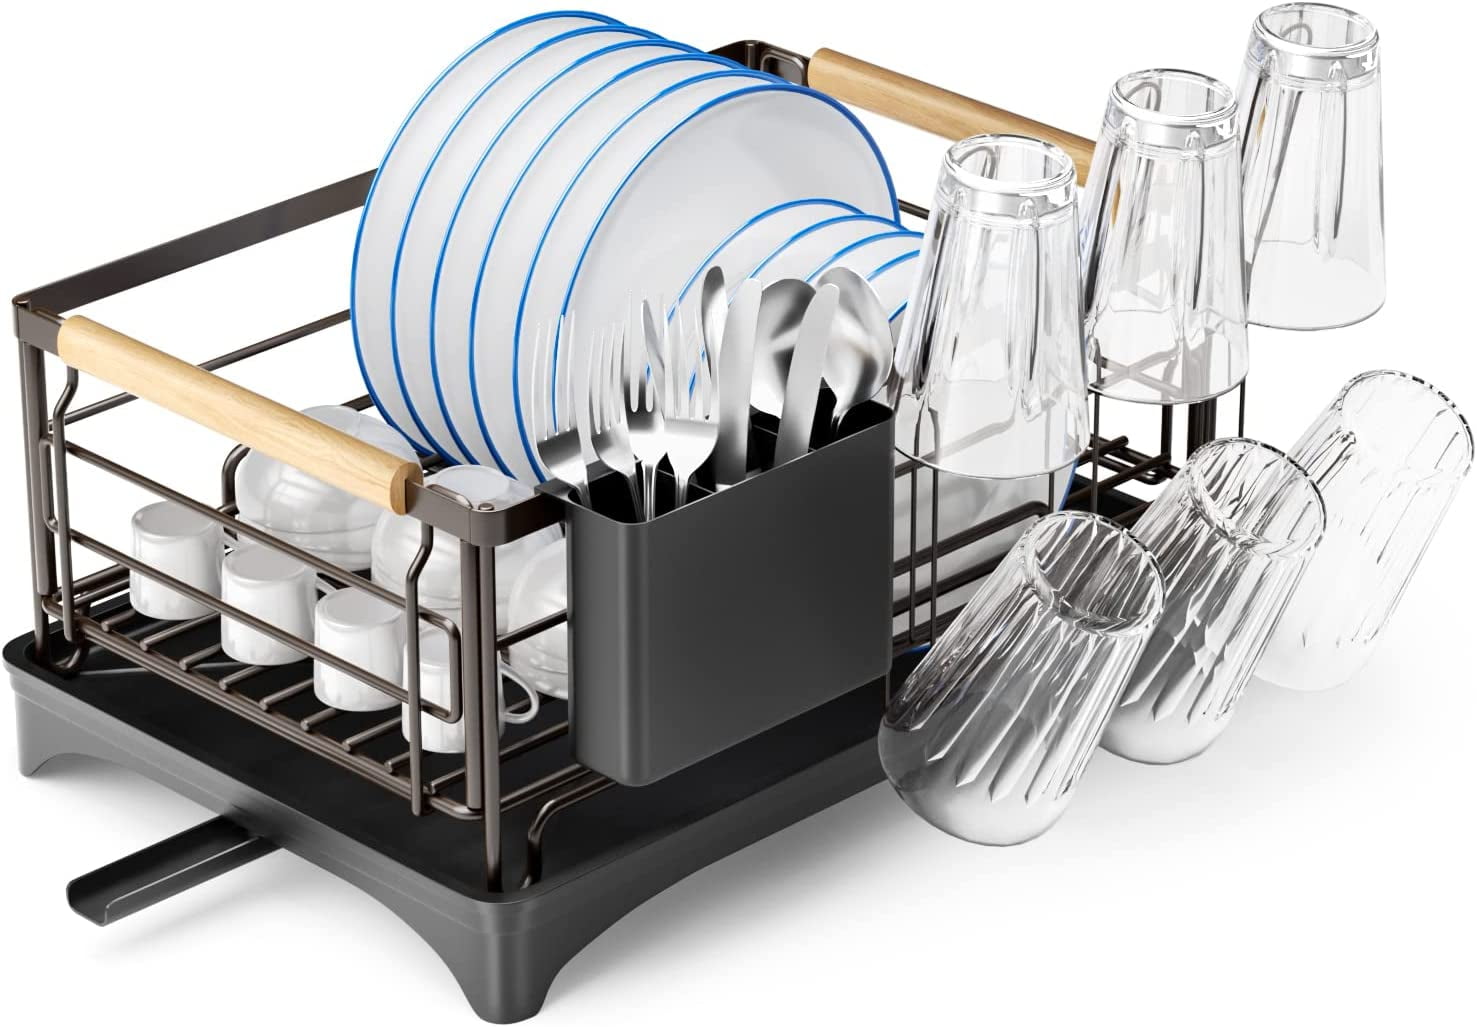 Dish Drying Rack, Dish Rack for Kitchen Counter, Rust-Proof Dish Drainer  with Drying Board and Utensil Holder for Kitchen Counter Cabinet,  16.6\u201d L× 12.6\u201dW× 7.8\u201dH, Bright Red 